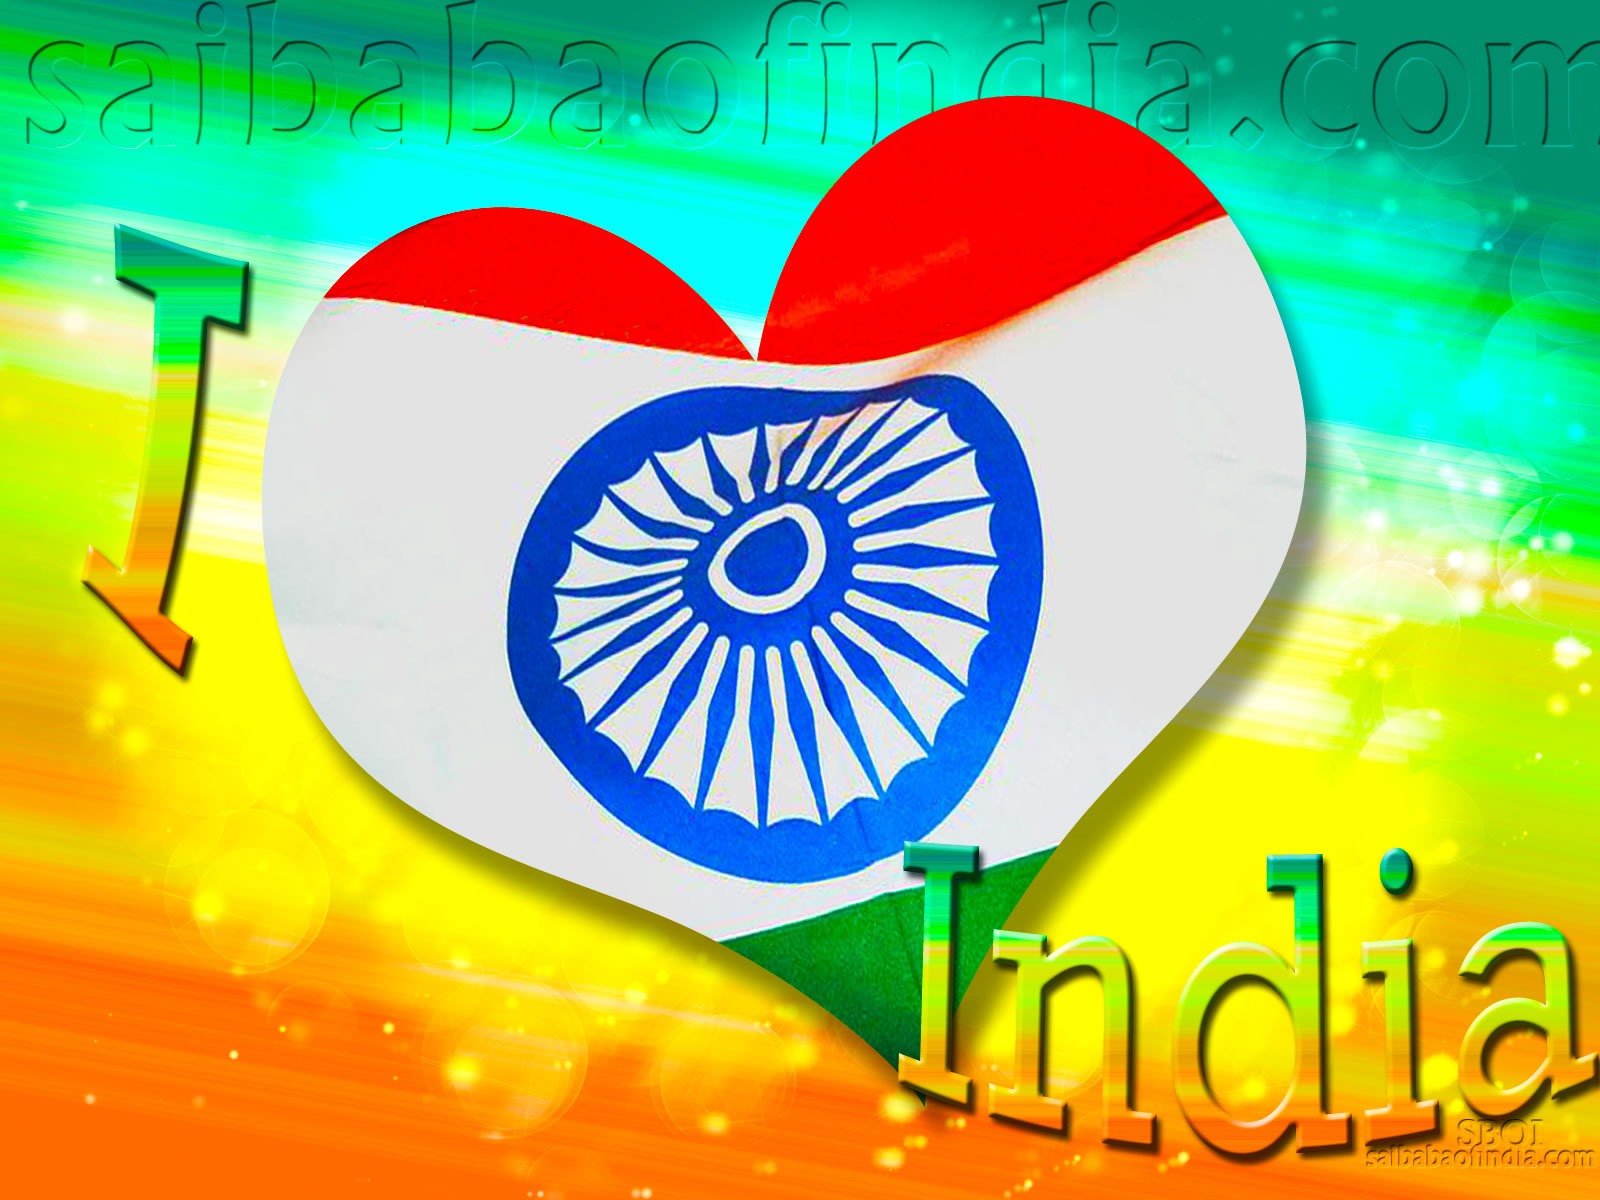 Independence day wallpapers & greeting cards 15th August Sai Baba